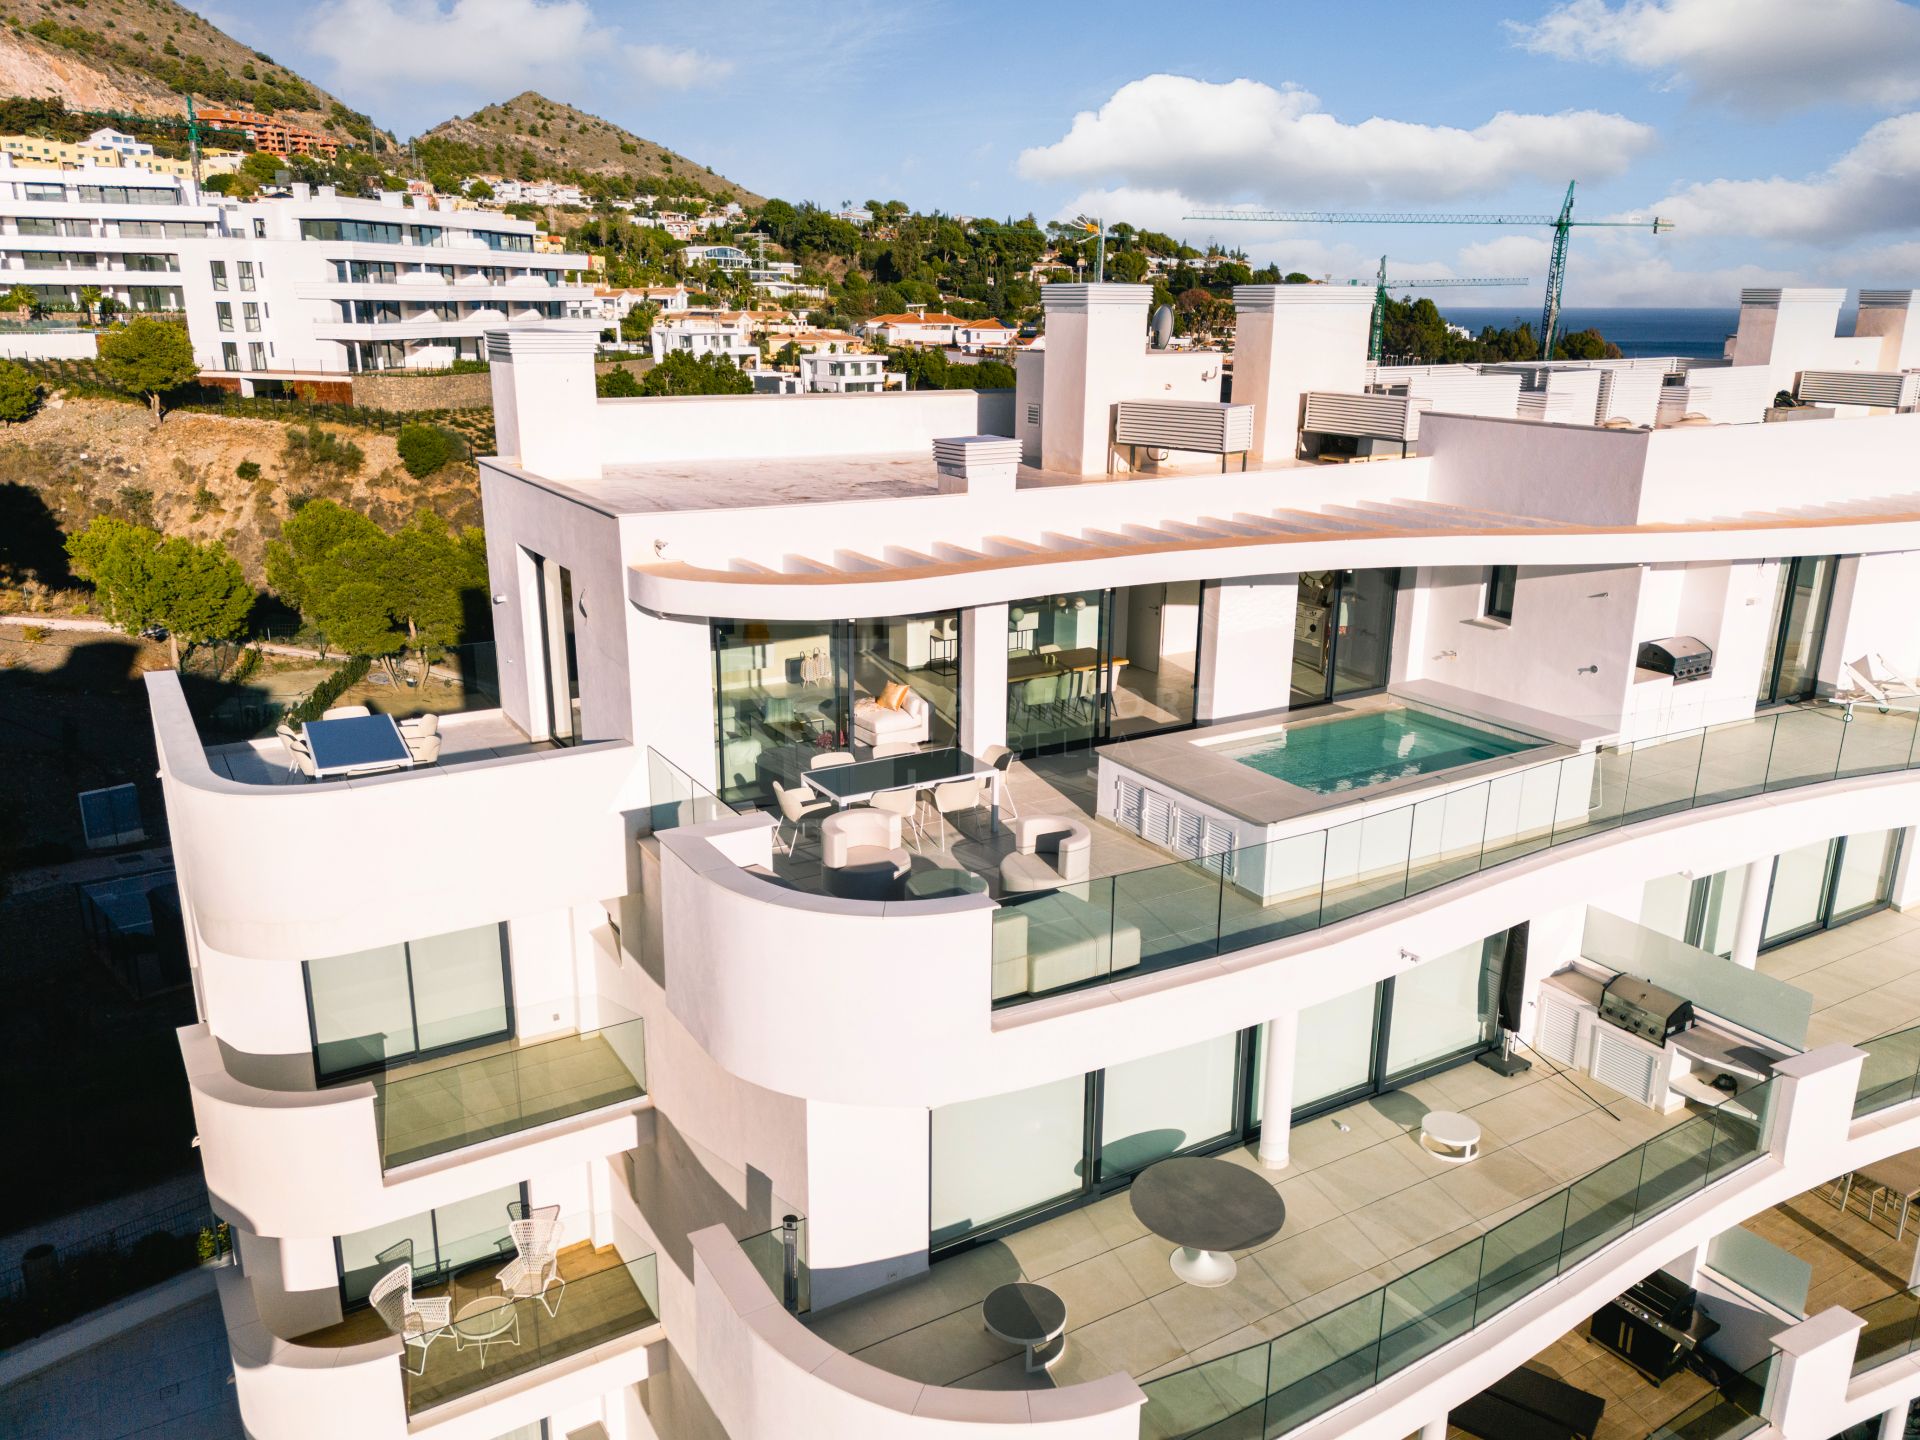 3 BEDROOM LUXURY PENTHOUSE WITH SEA VIEWS & PRIVATE POOL LOCATED IN HIGUERON WEST, FUENGIROLA